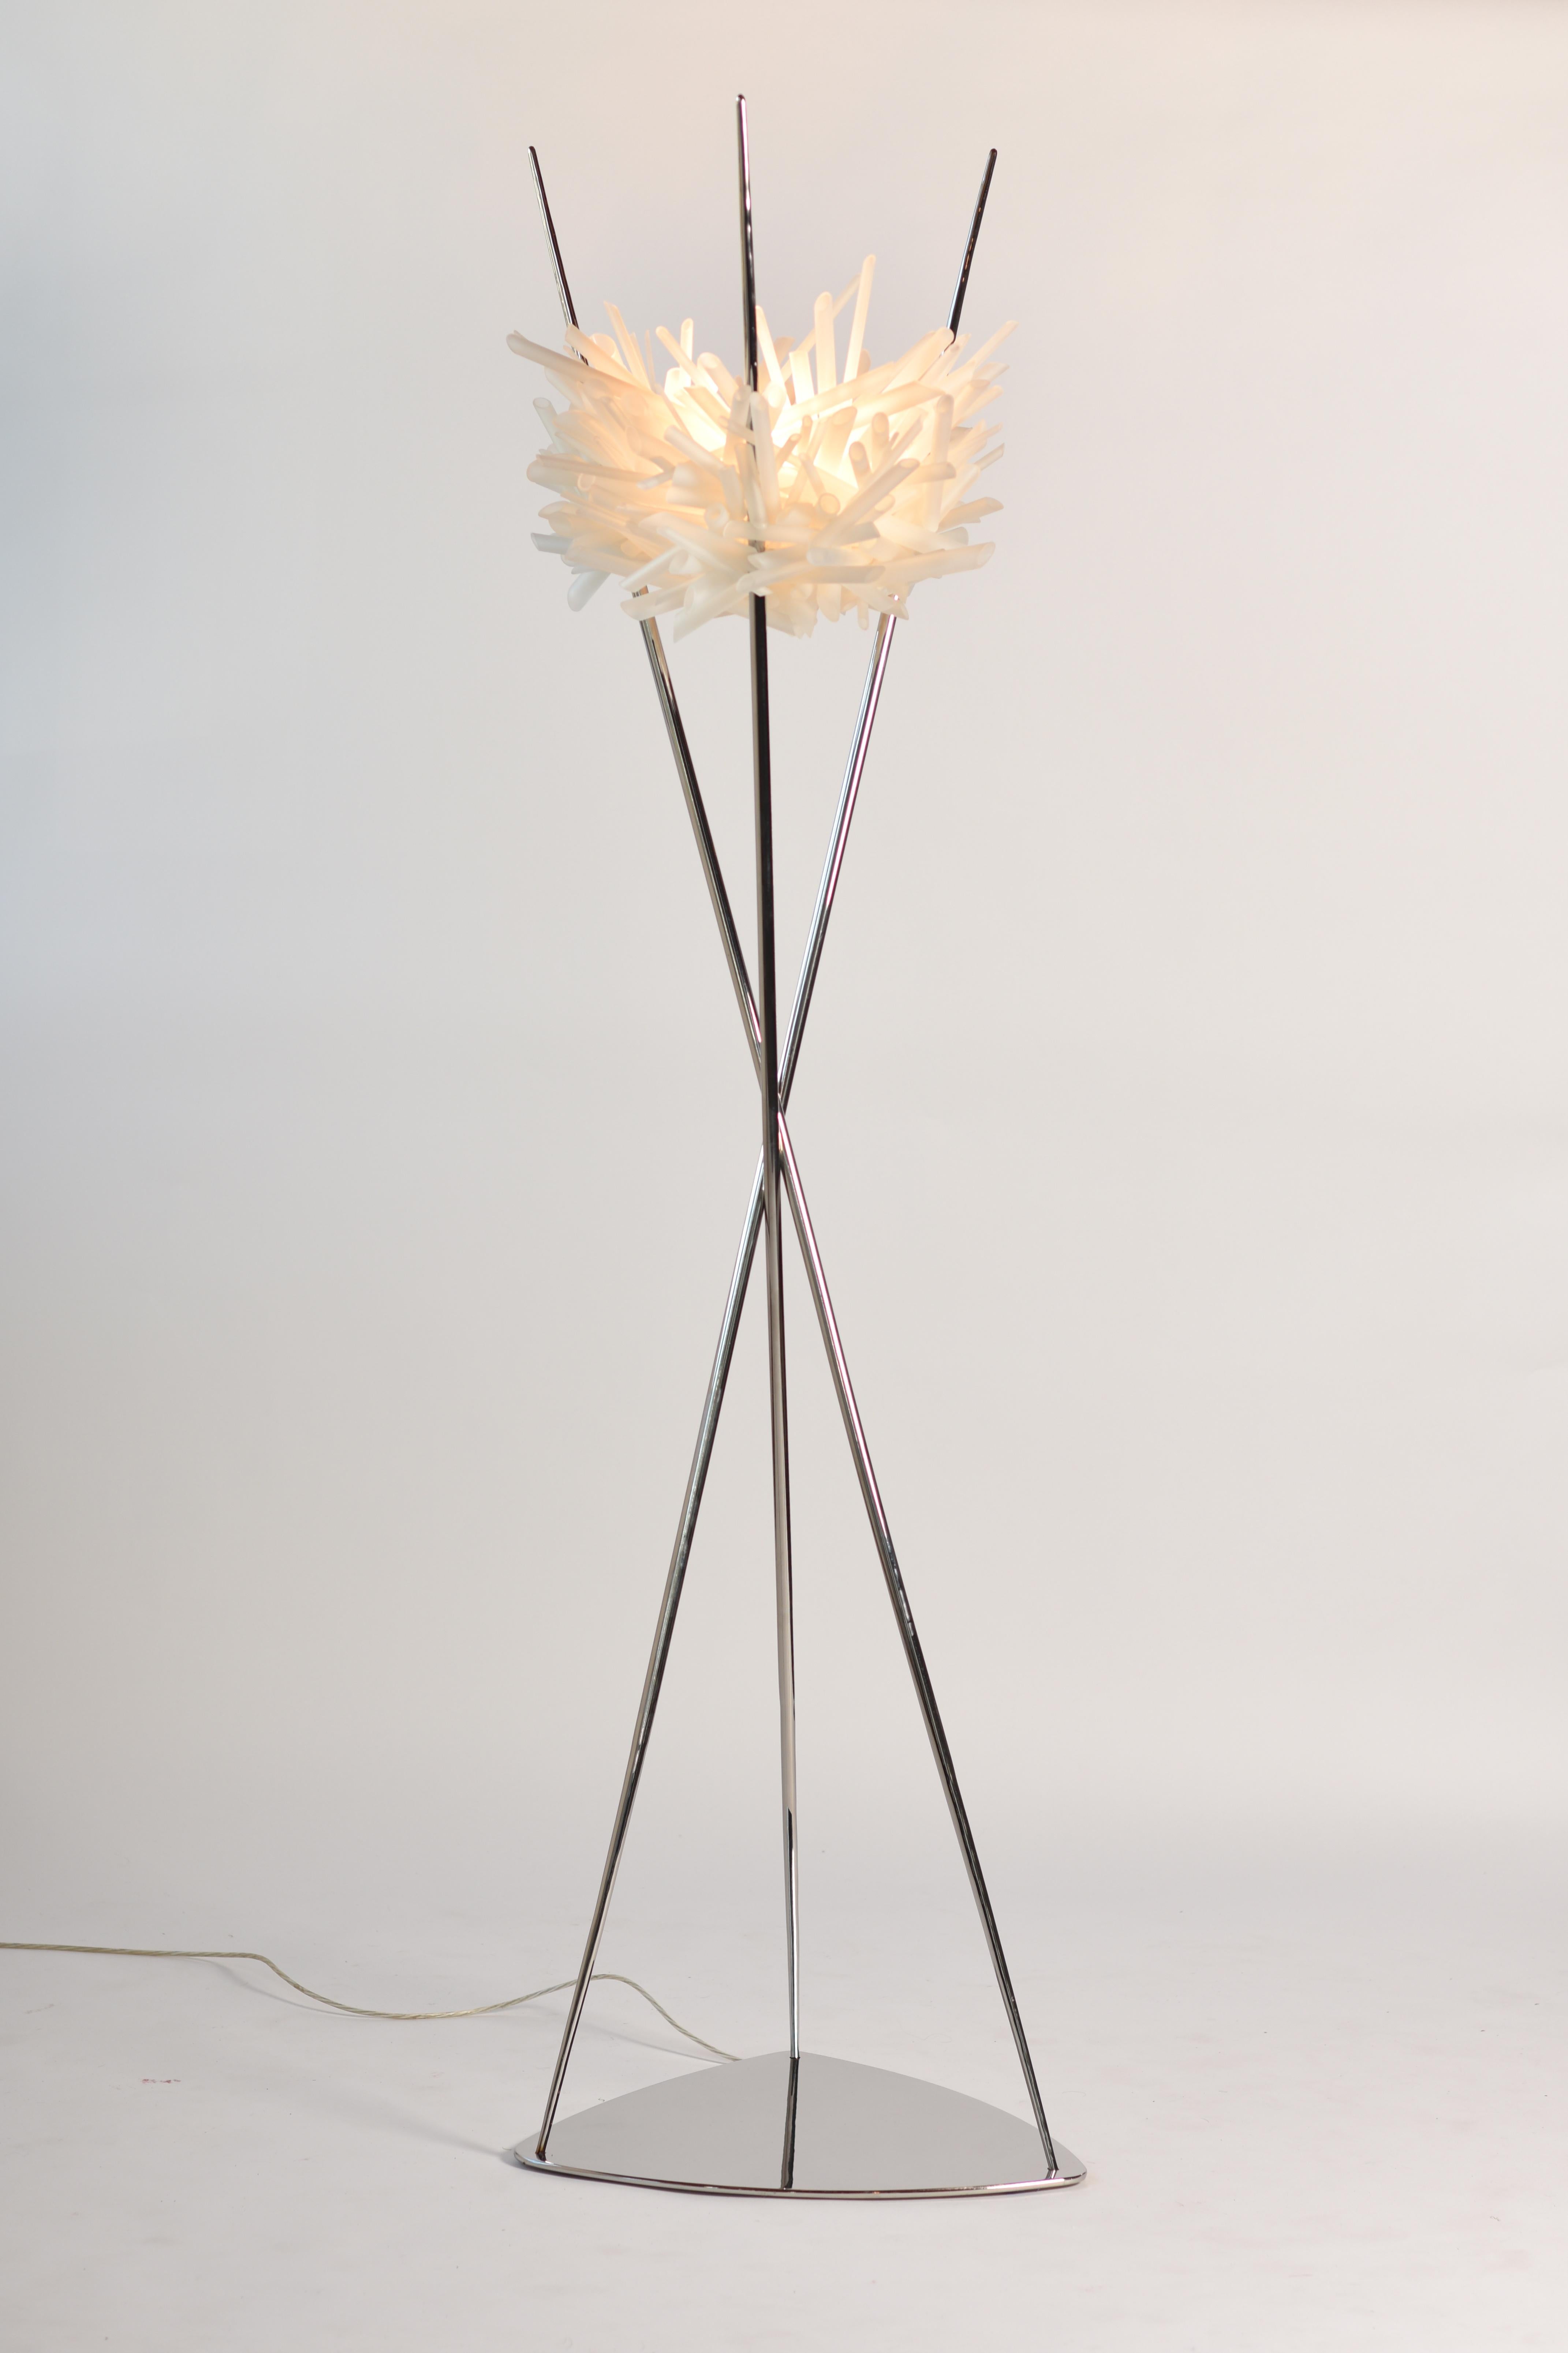 Boro boro floor light by Neal Aronowitz Design
Dimensions: Ø 61 x H 223.5 cm.
Materials: Borosilicate glass tubes and rods, stainless steel base, dimmable xenon halogen bulbs.
One of a kind.
All our lamps can be wired according to each country.